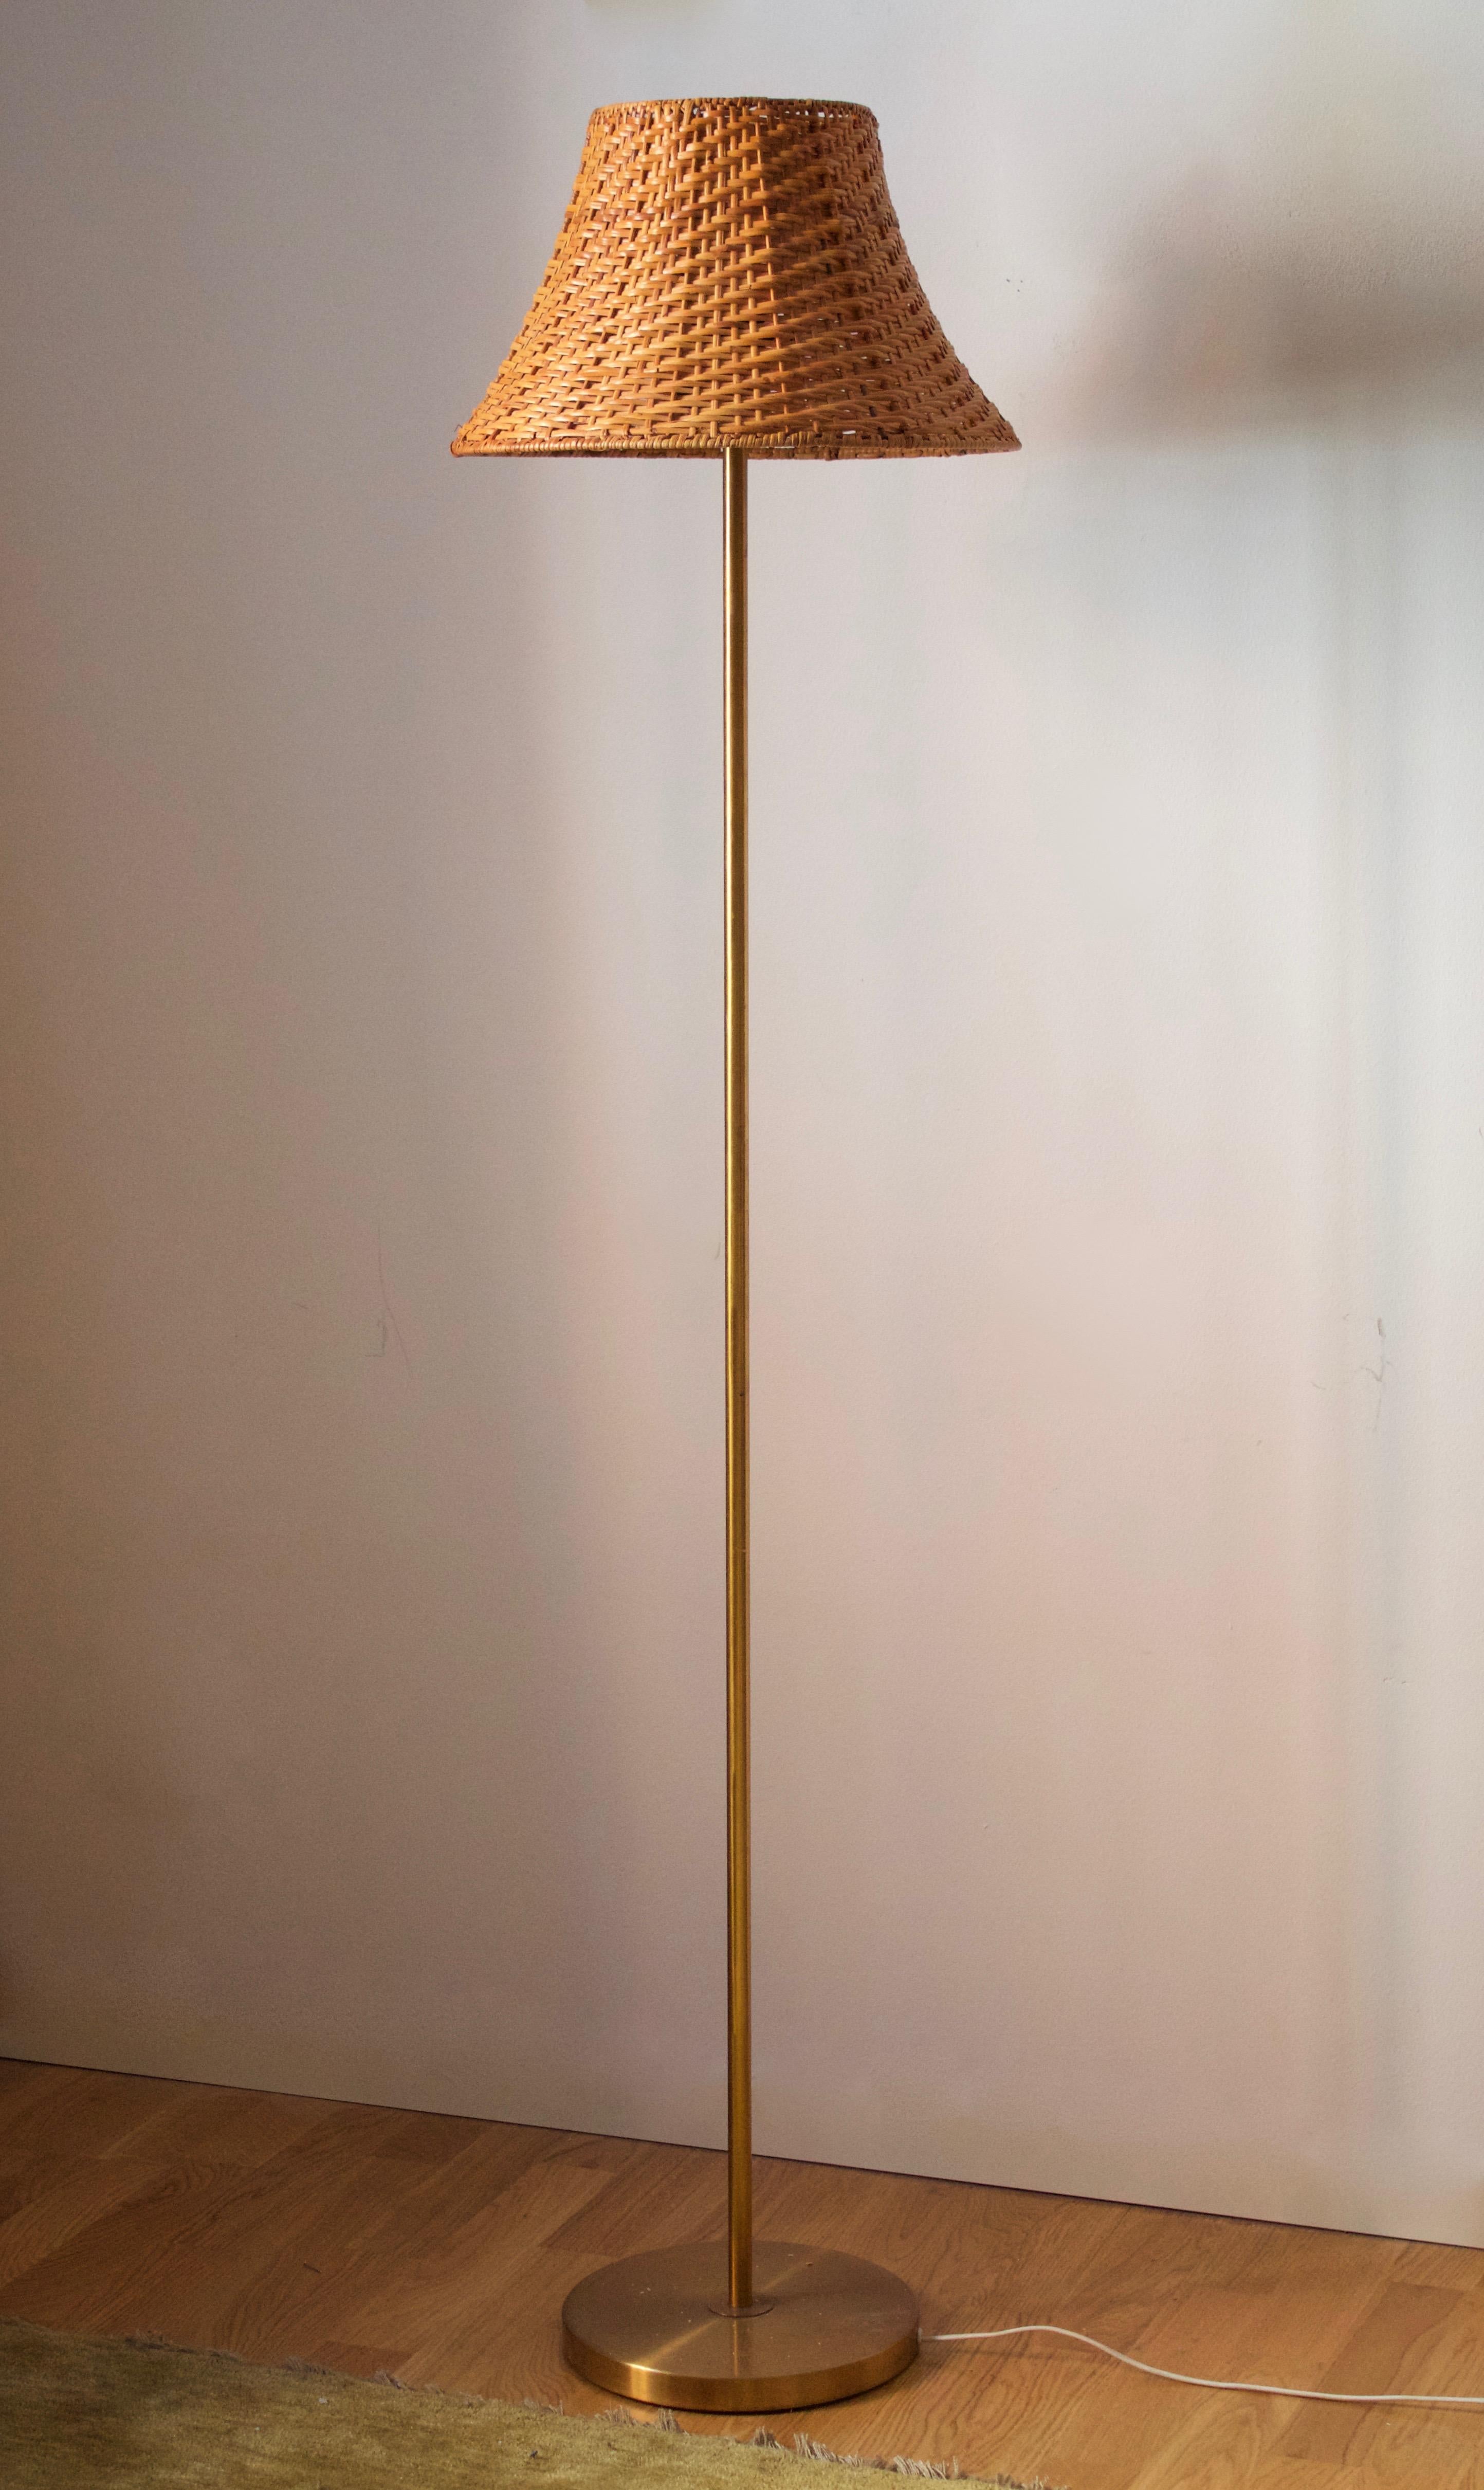 A modernist floor lamp. Produced by Nordiska Kompaniet, 1940s. Stamped.

Other designers of the period include Paavo Tynell, Lisa Johansson-Pape, Carl-Axel Acking, and Gunnar Asplund.